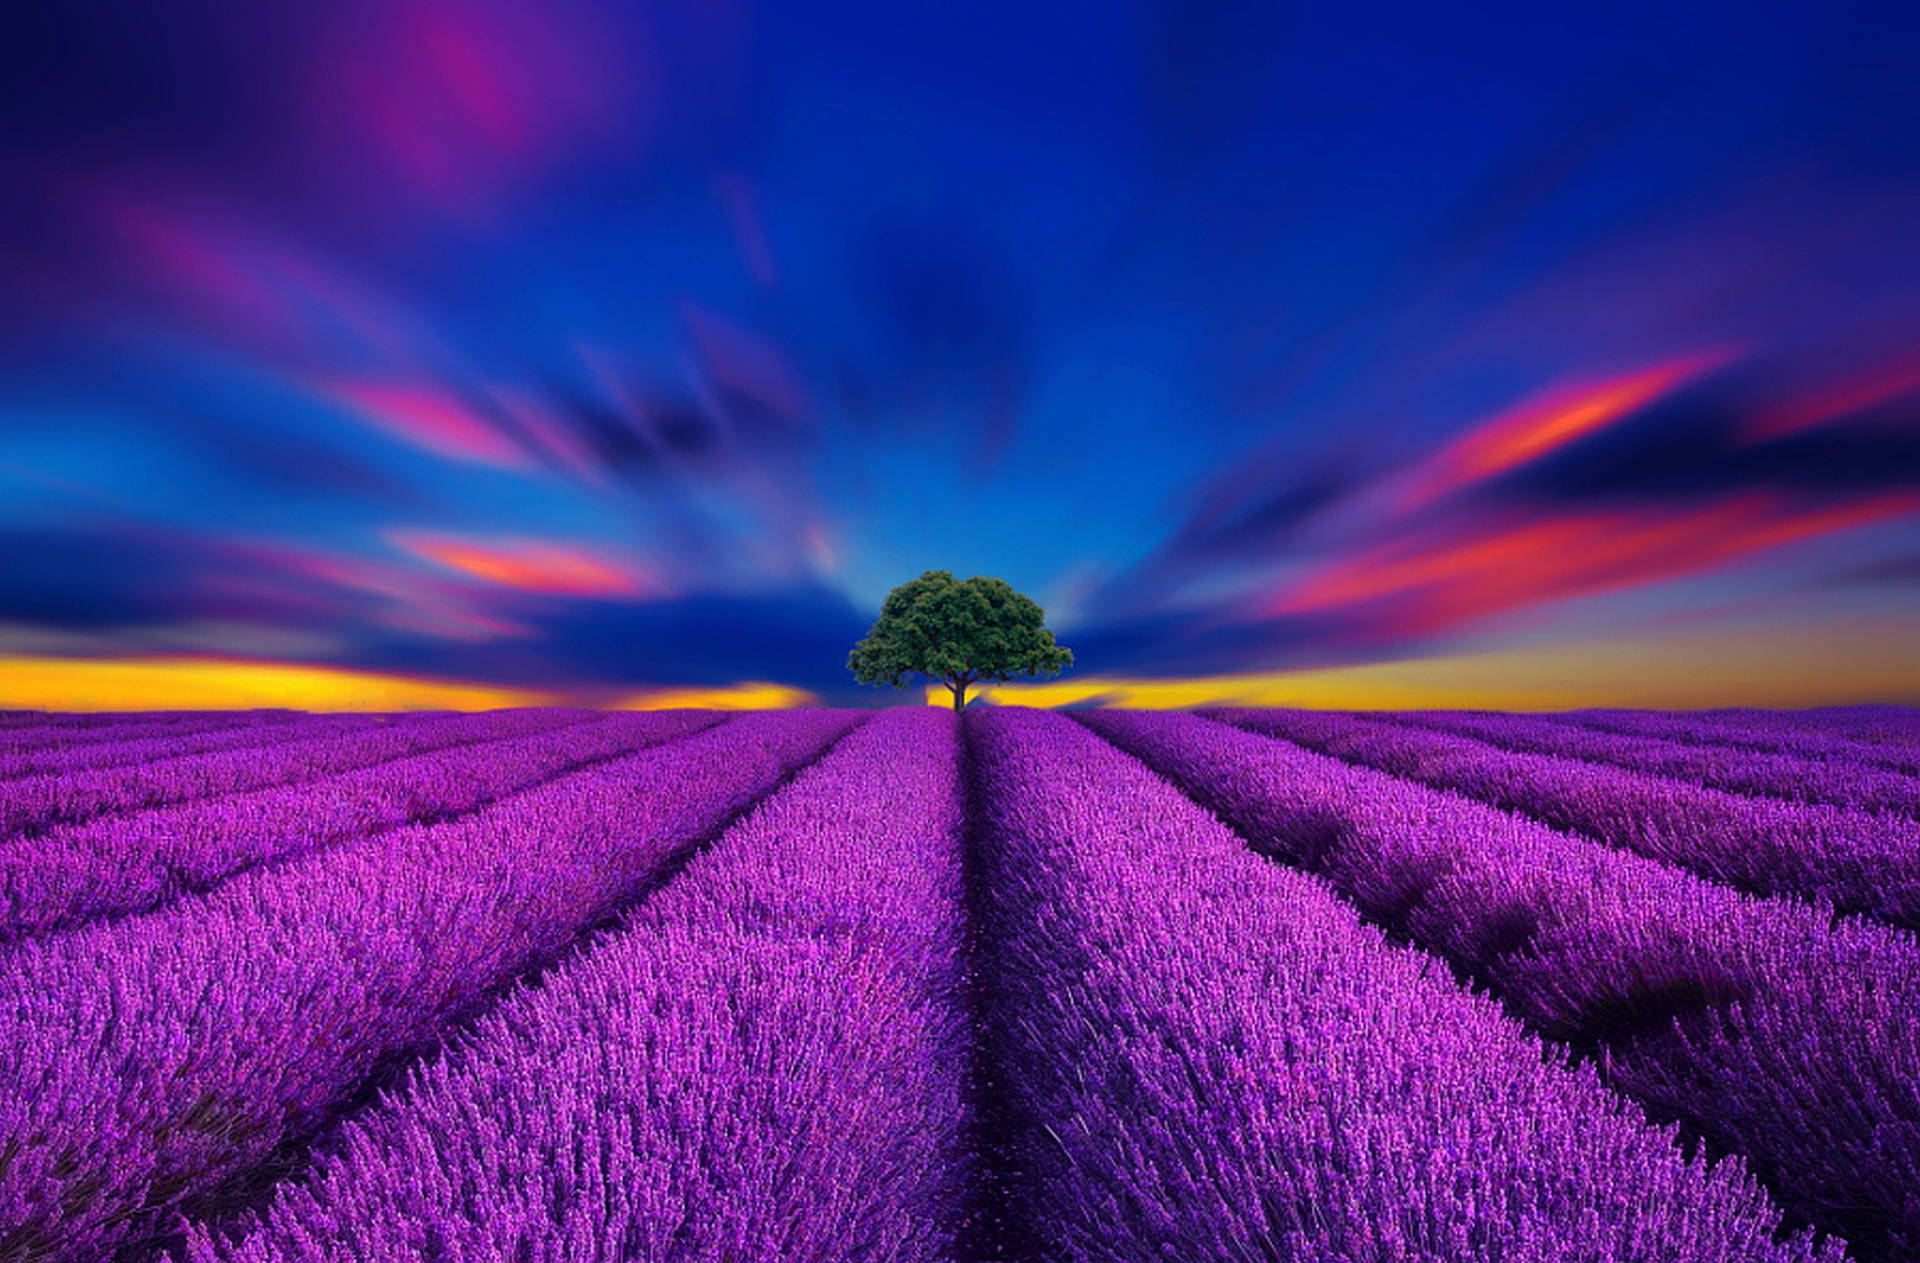 Lavender Aesthetic Field And Vibrant Blue Skies Background